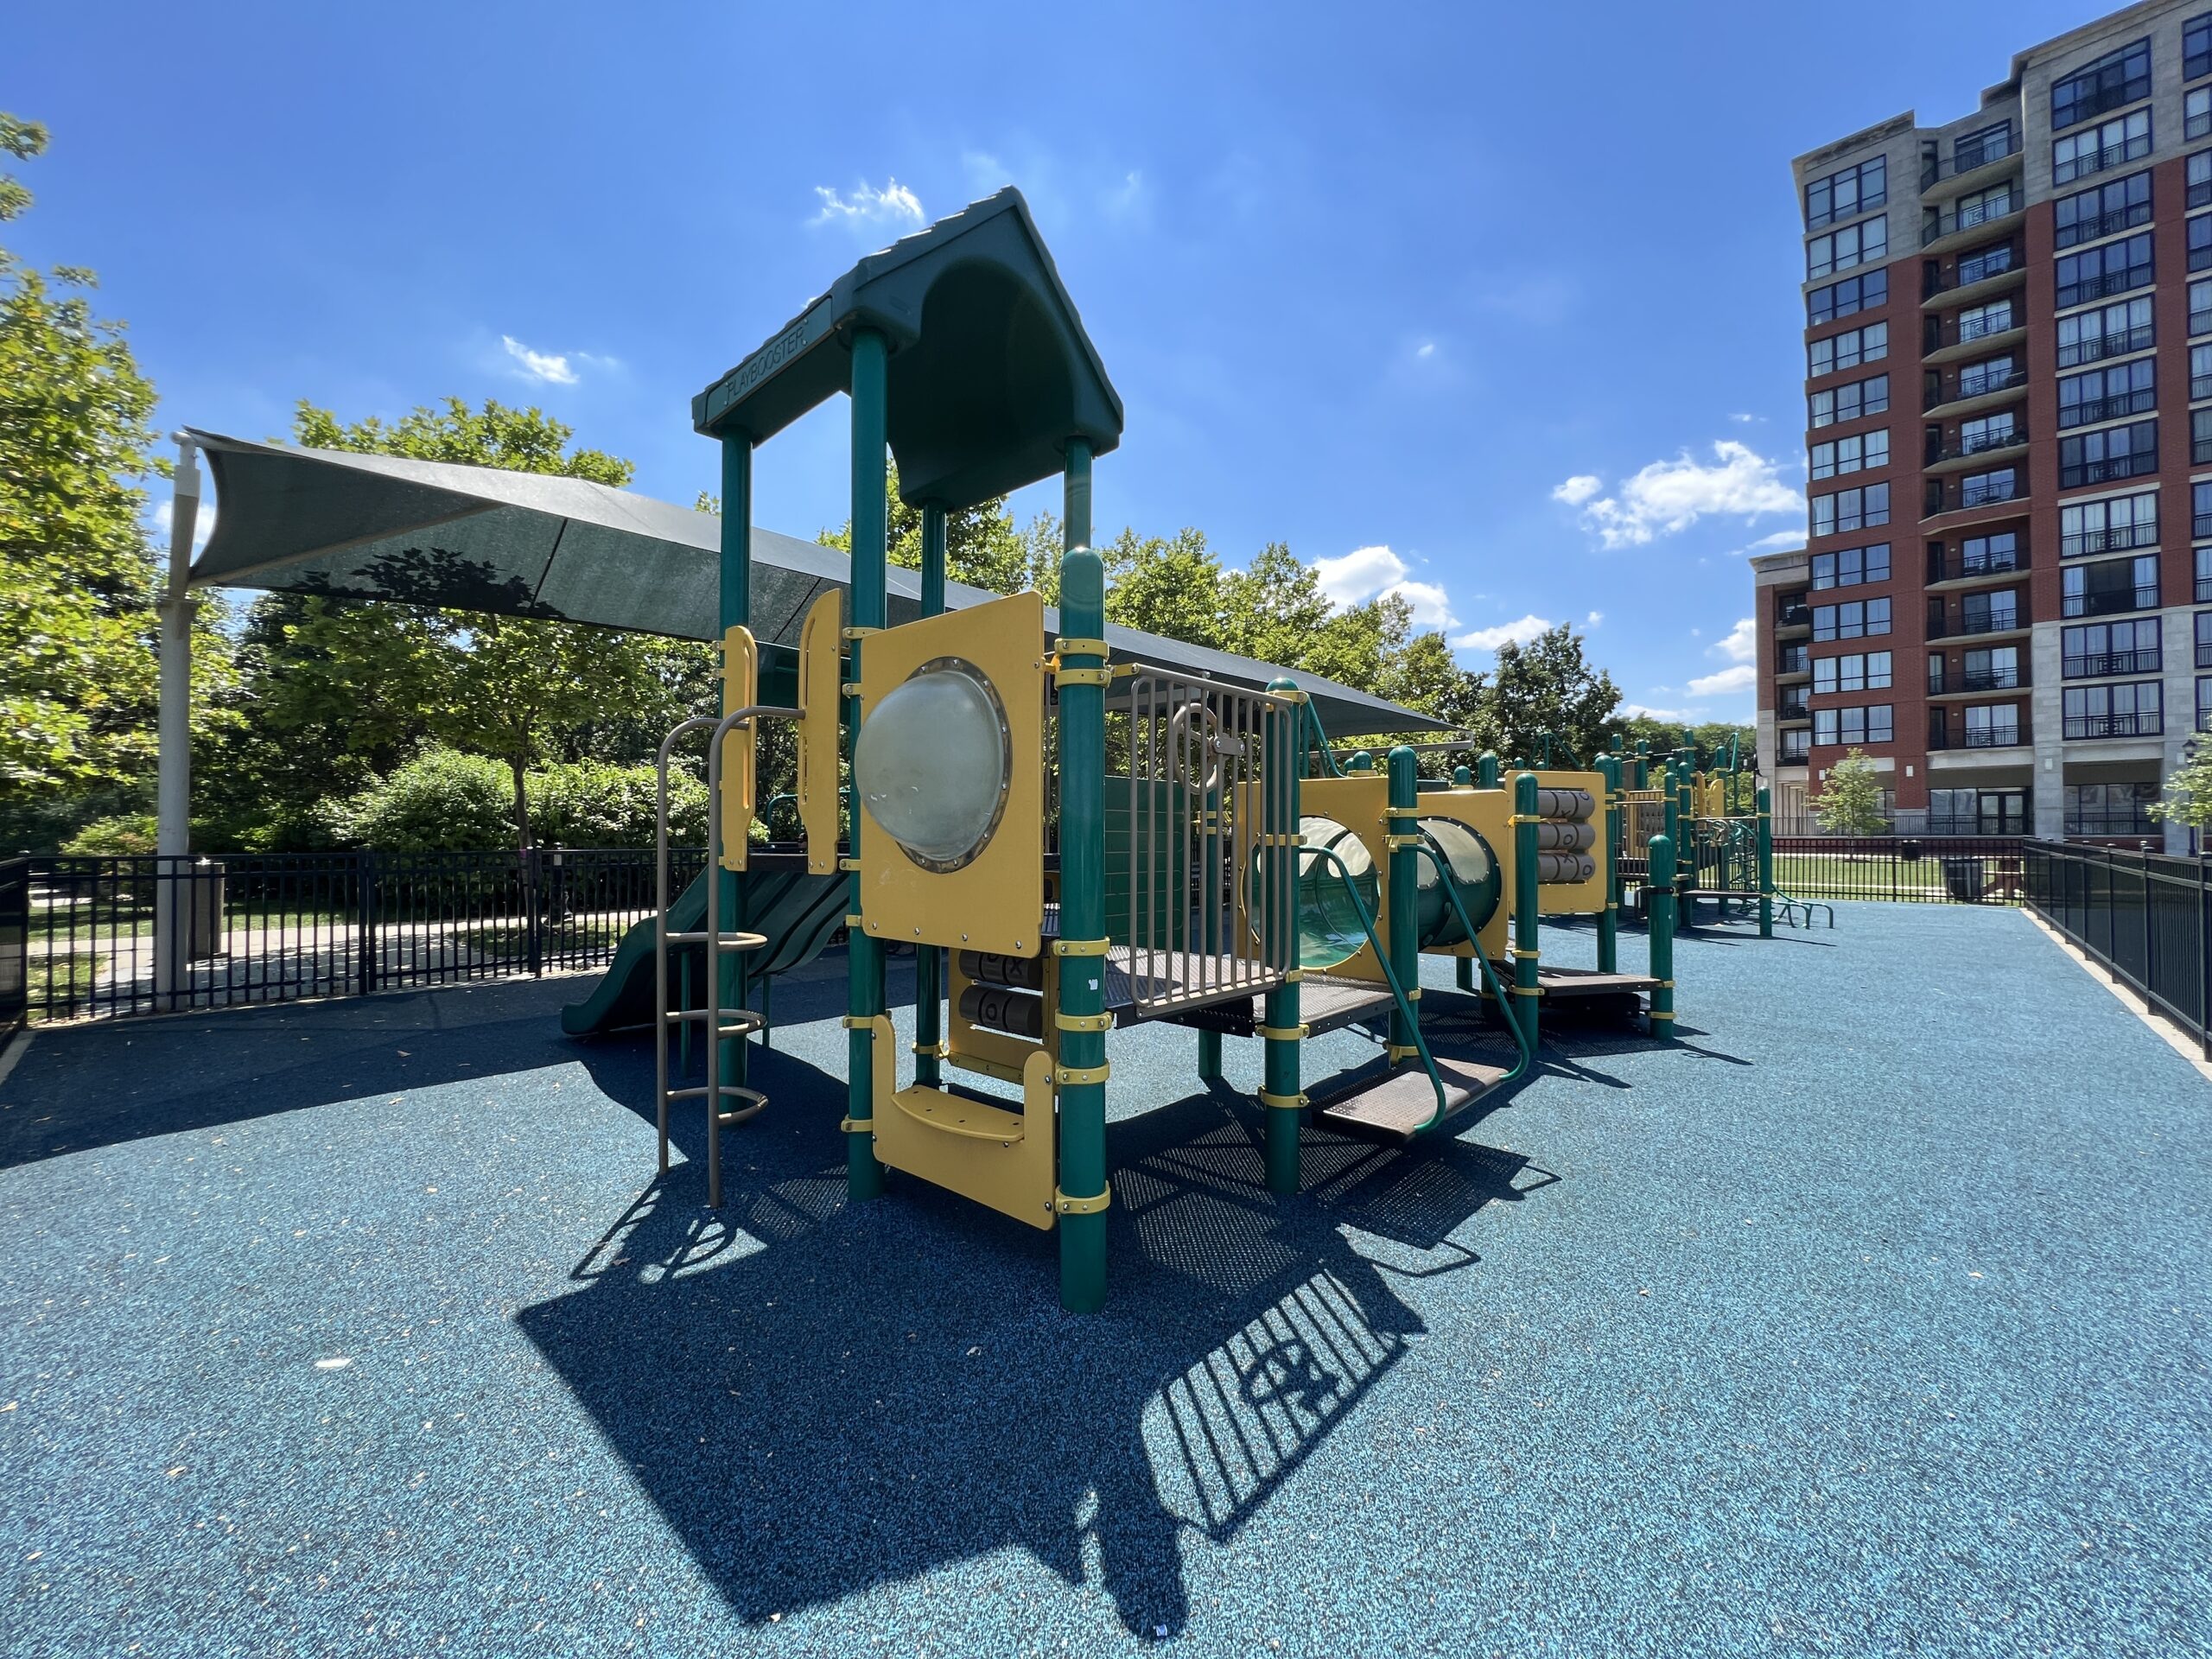 Maxwell Place Park Playground in Hoboken NJ - WIDE image second playground back view facing water